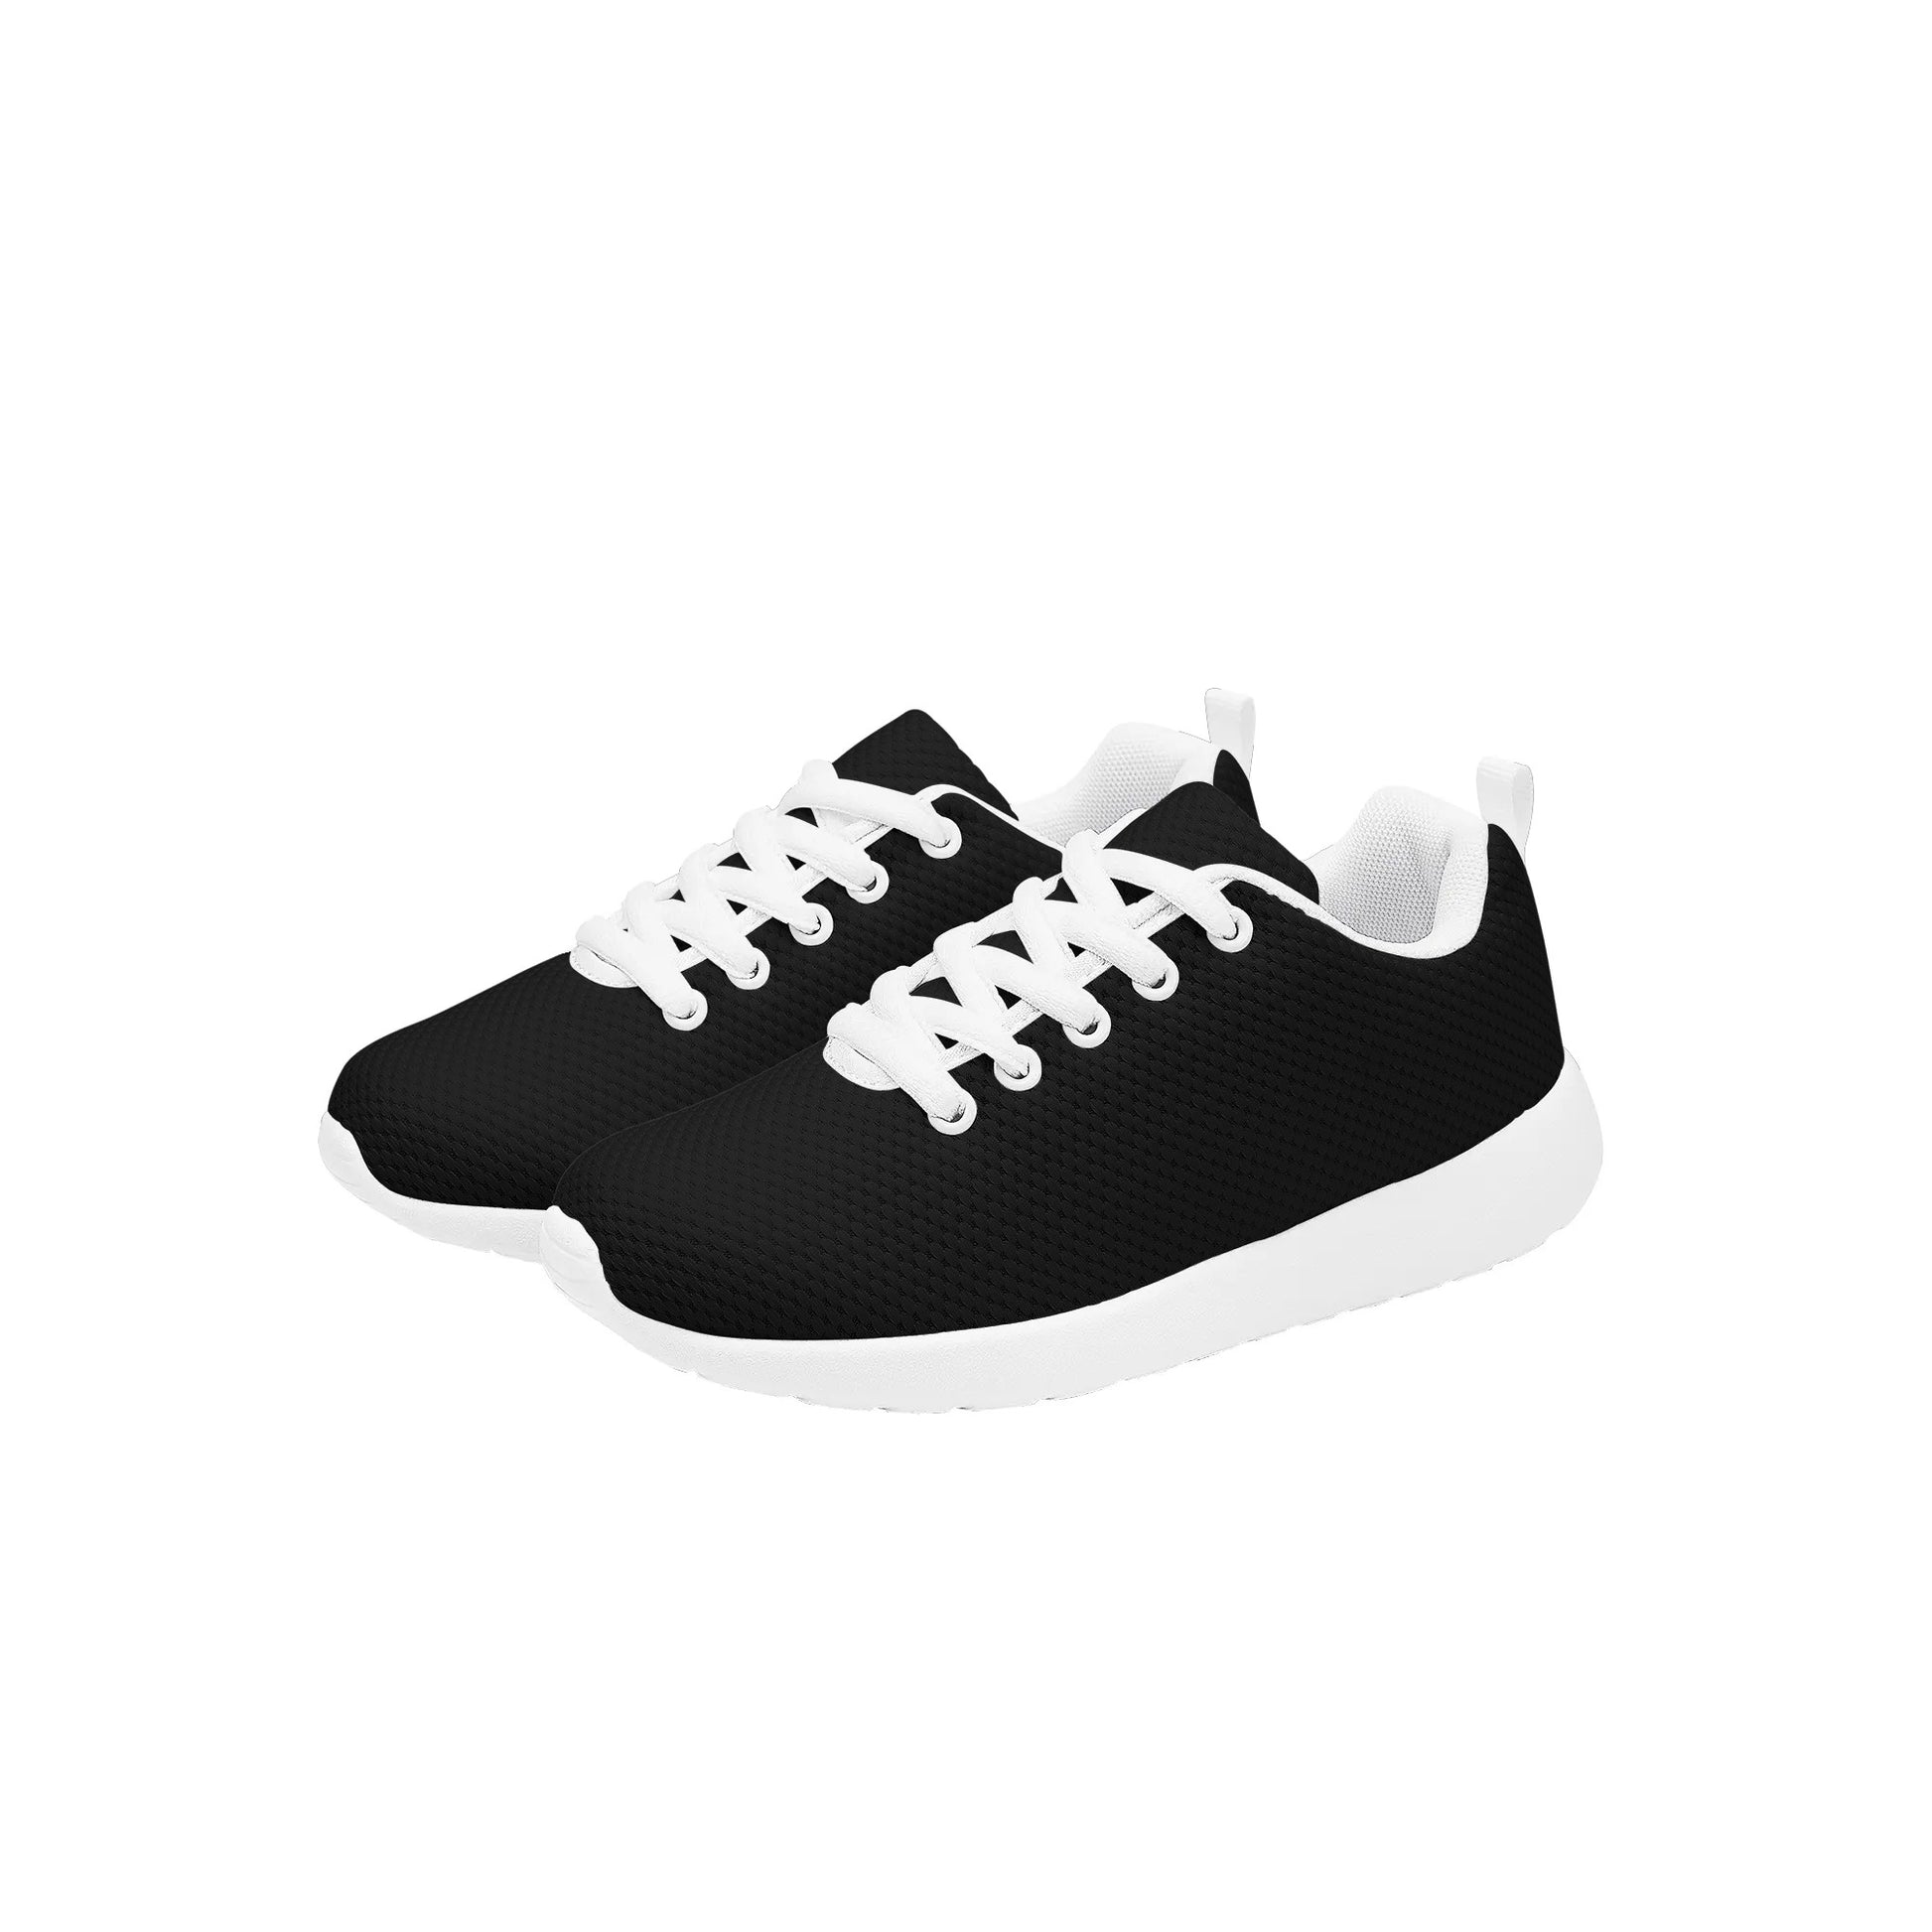 Created With A Purpose Kids Lace-up Athletic Christian Sneakers popcustoms